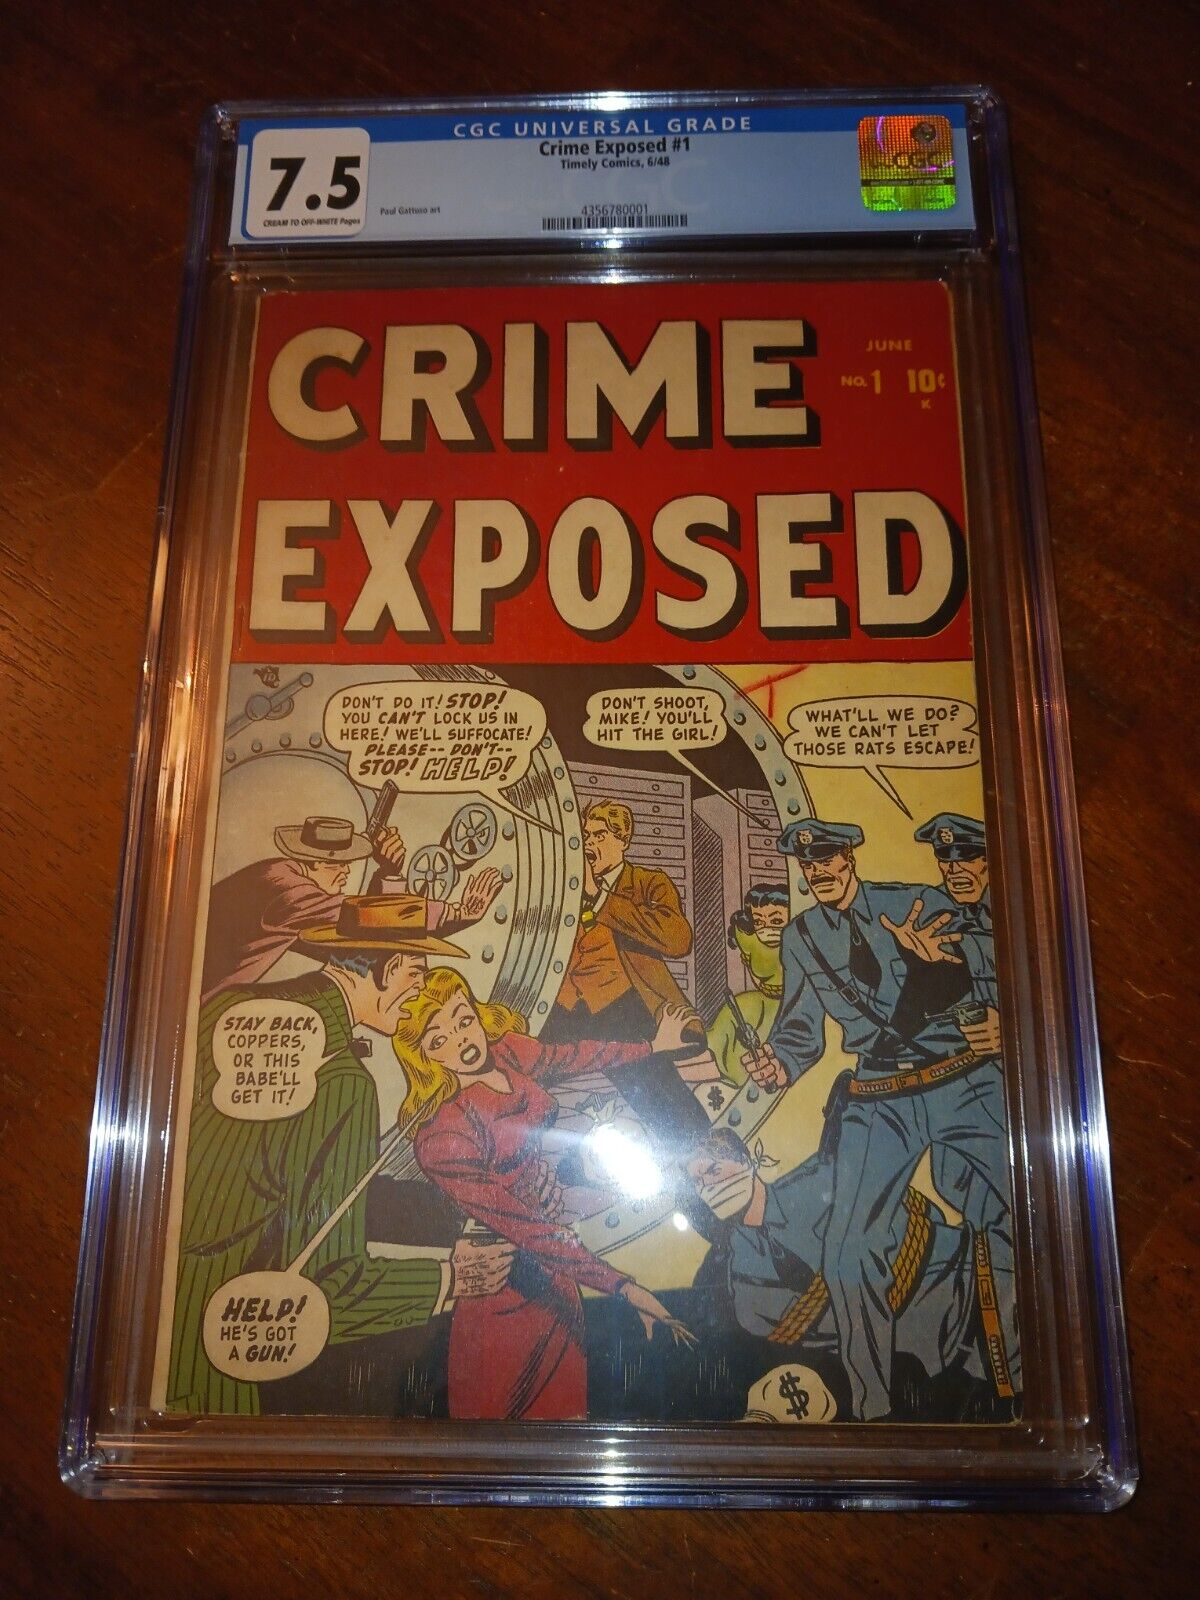 CRIME EXPOSED #1 1948 TIMLEY COMICS STAN LEE.  (MARVEL) CGC 7.5. FRESH FROM CGC